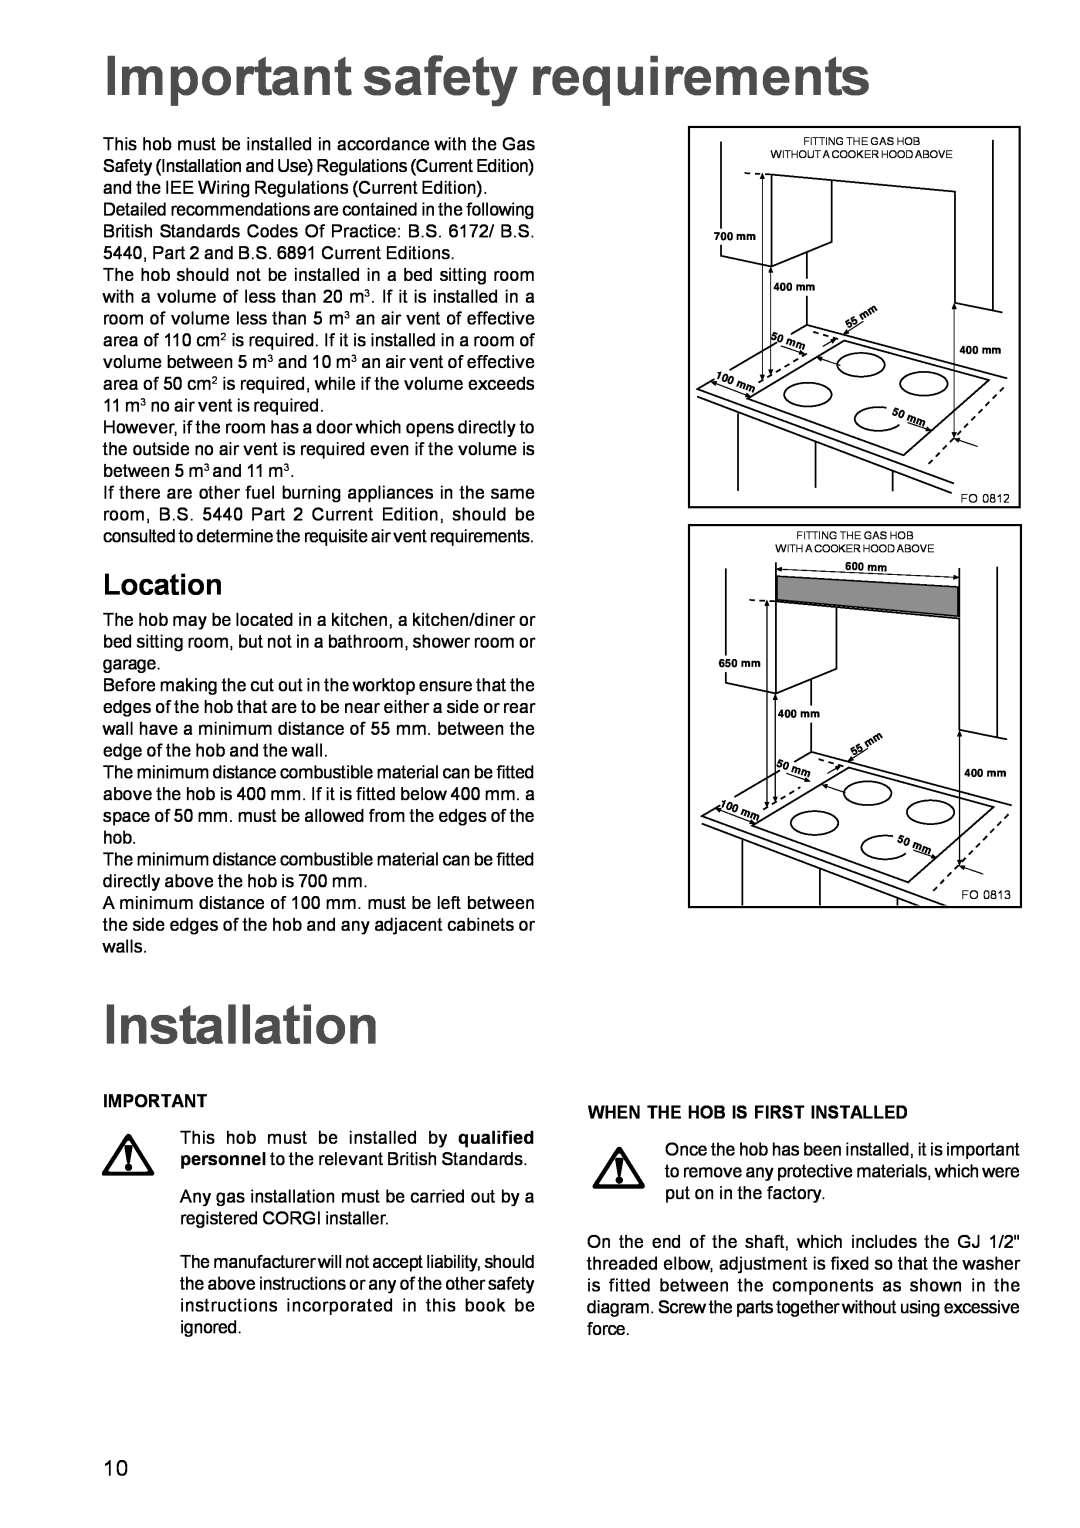 Zanussi GAS HOB manual Important safety requirements, Installation, Location 